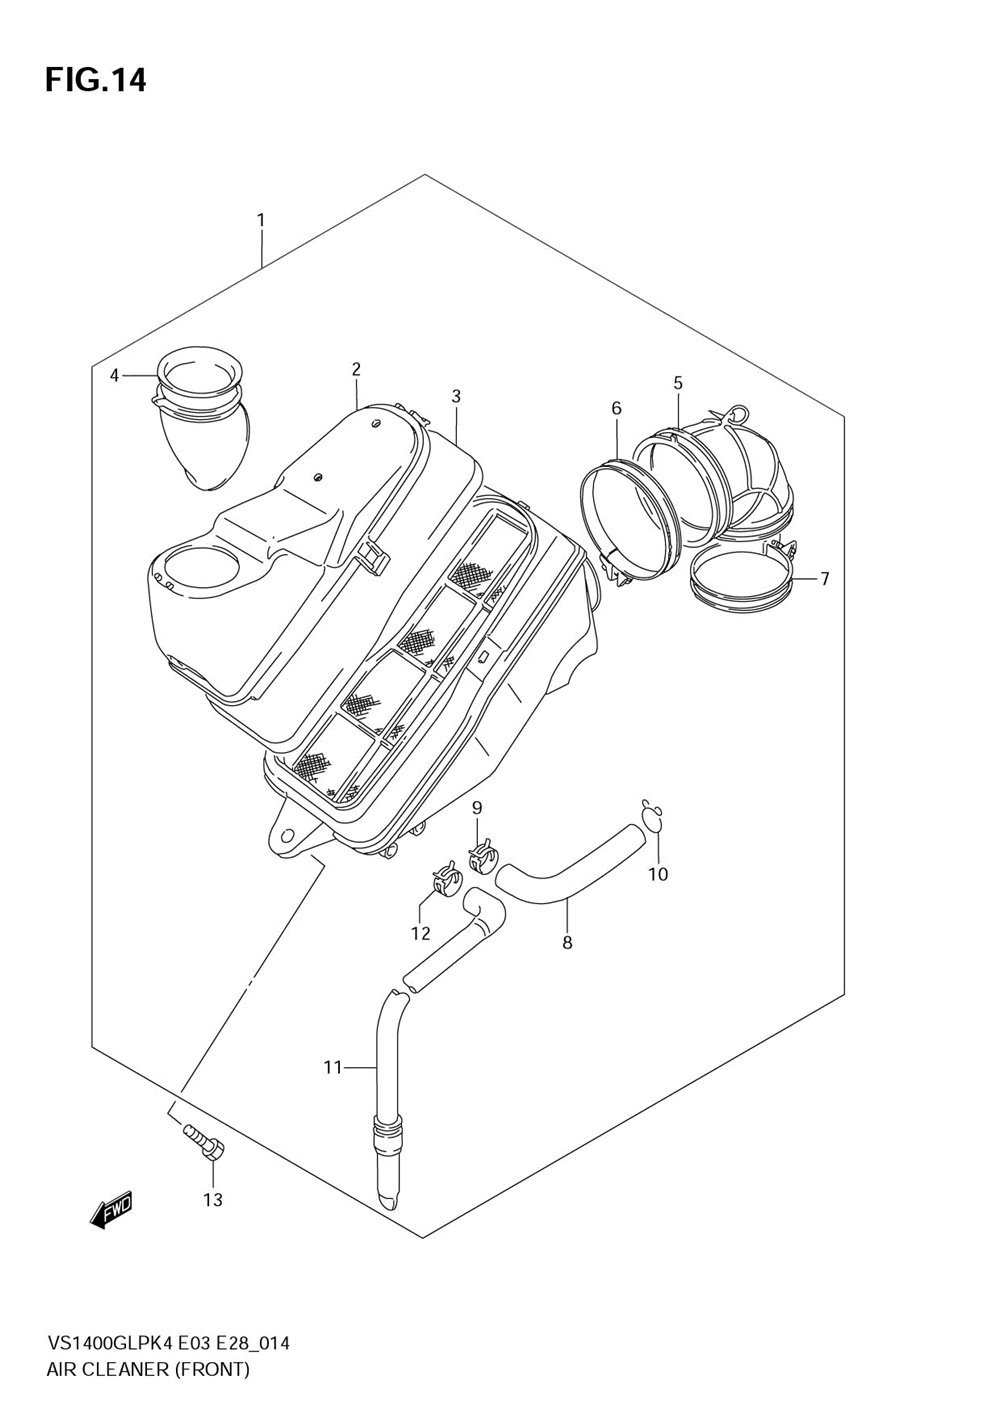 Air cleaner (front)